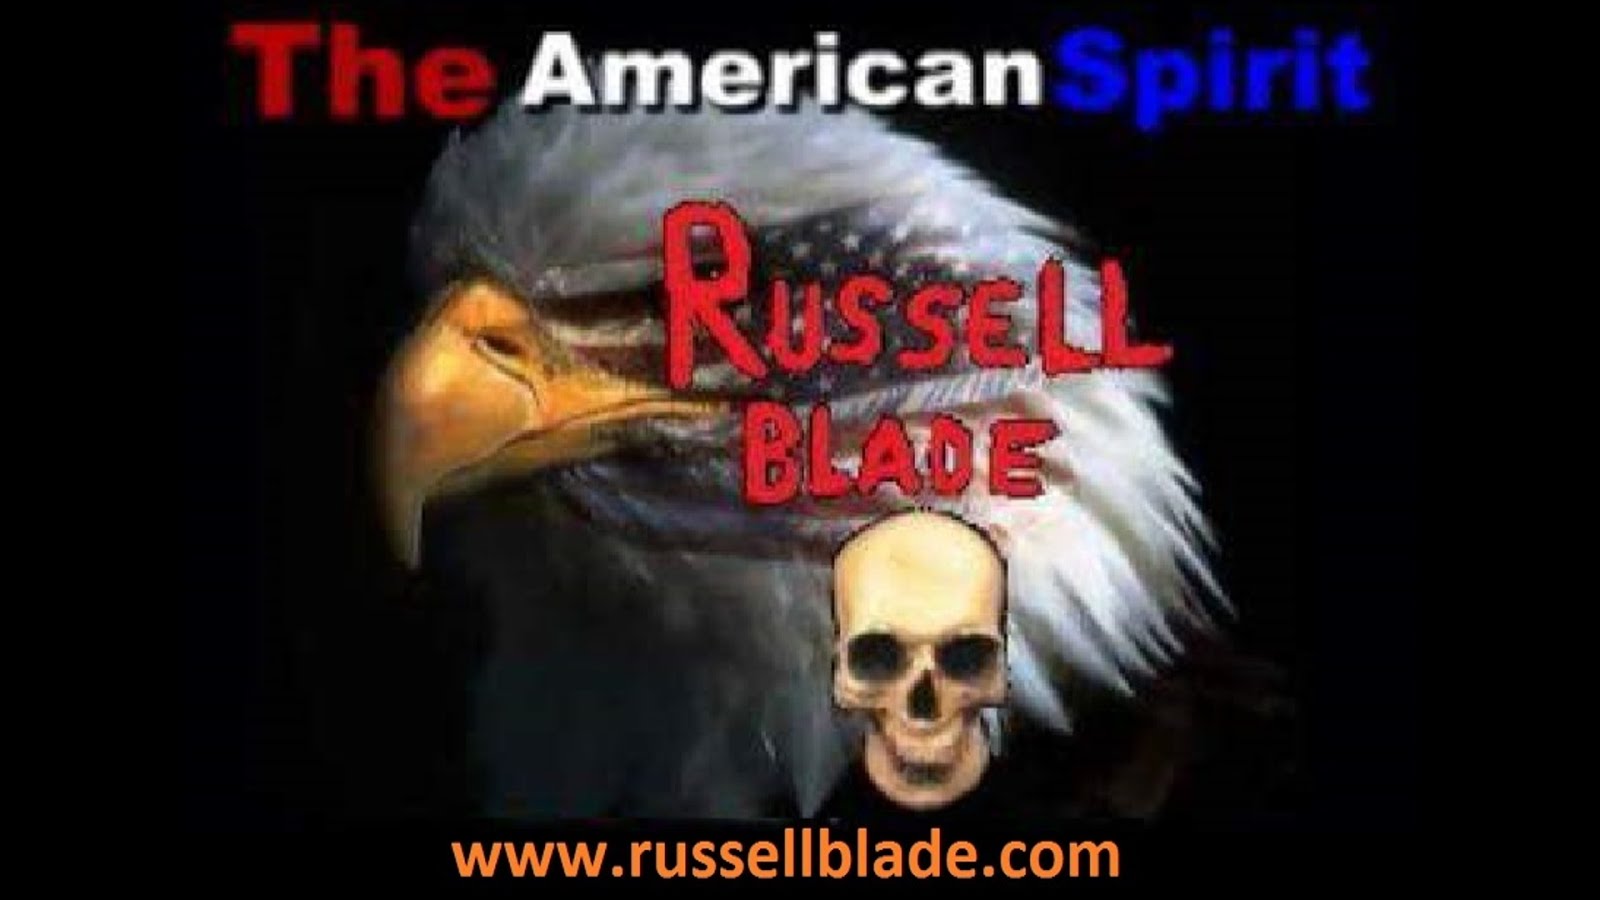 The American Spirit Russell Blade